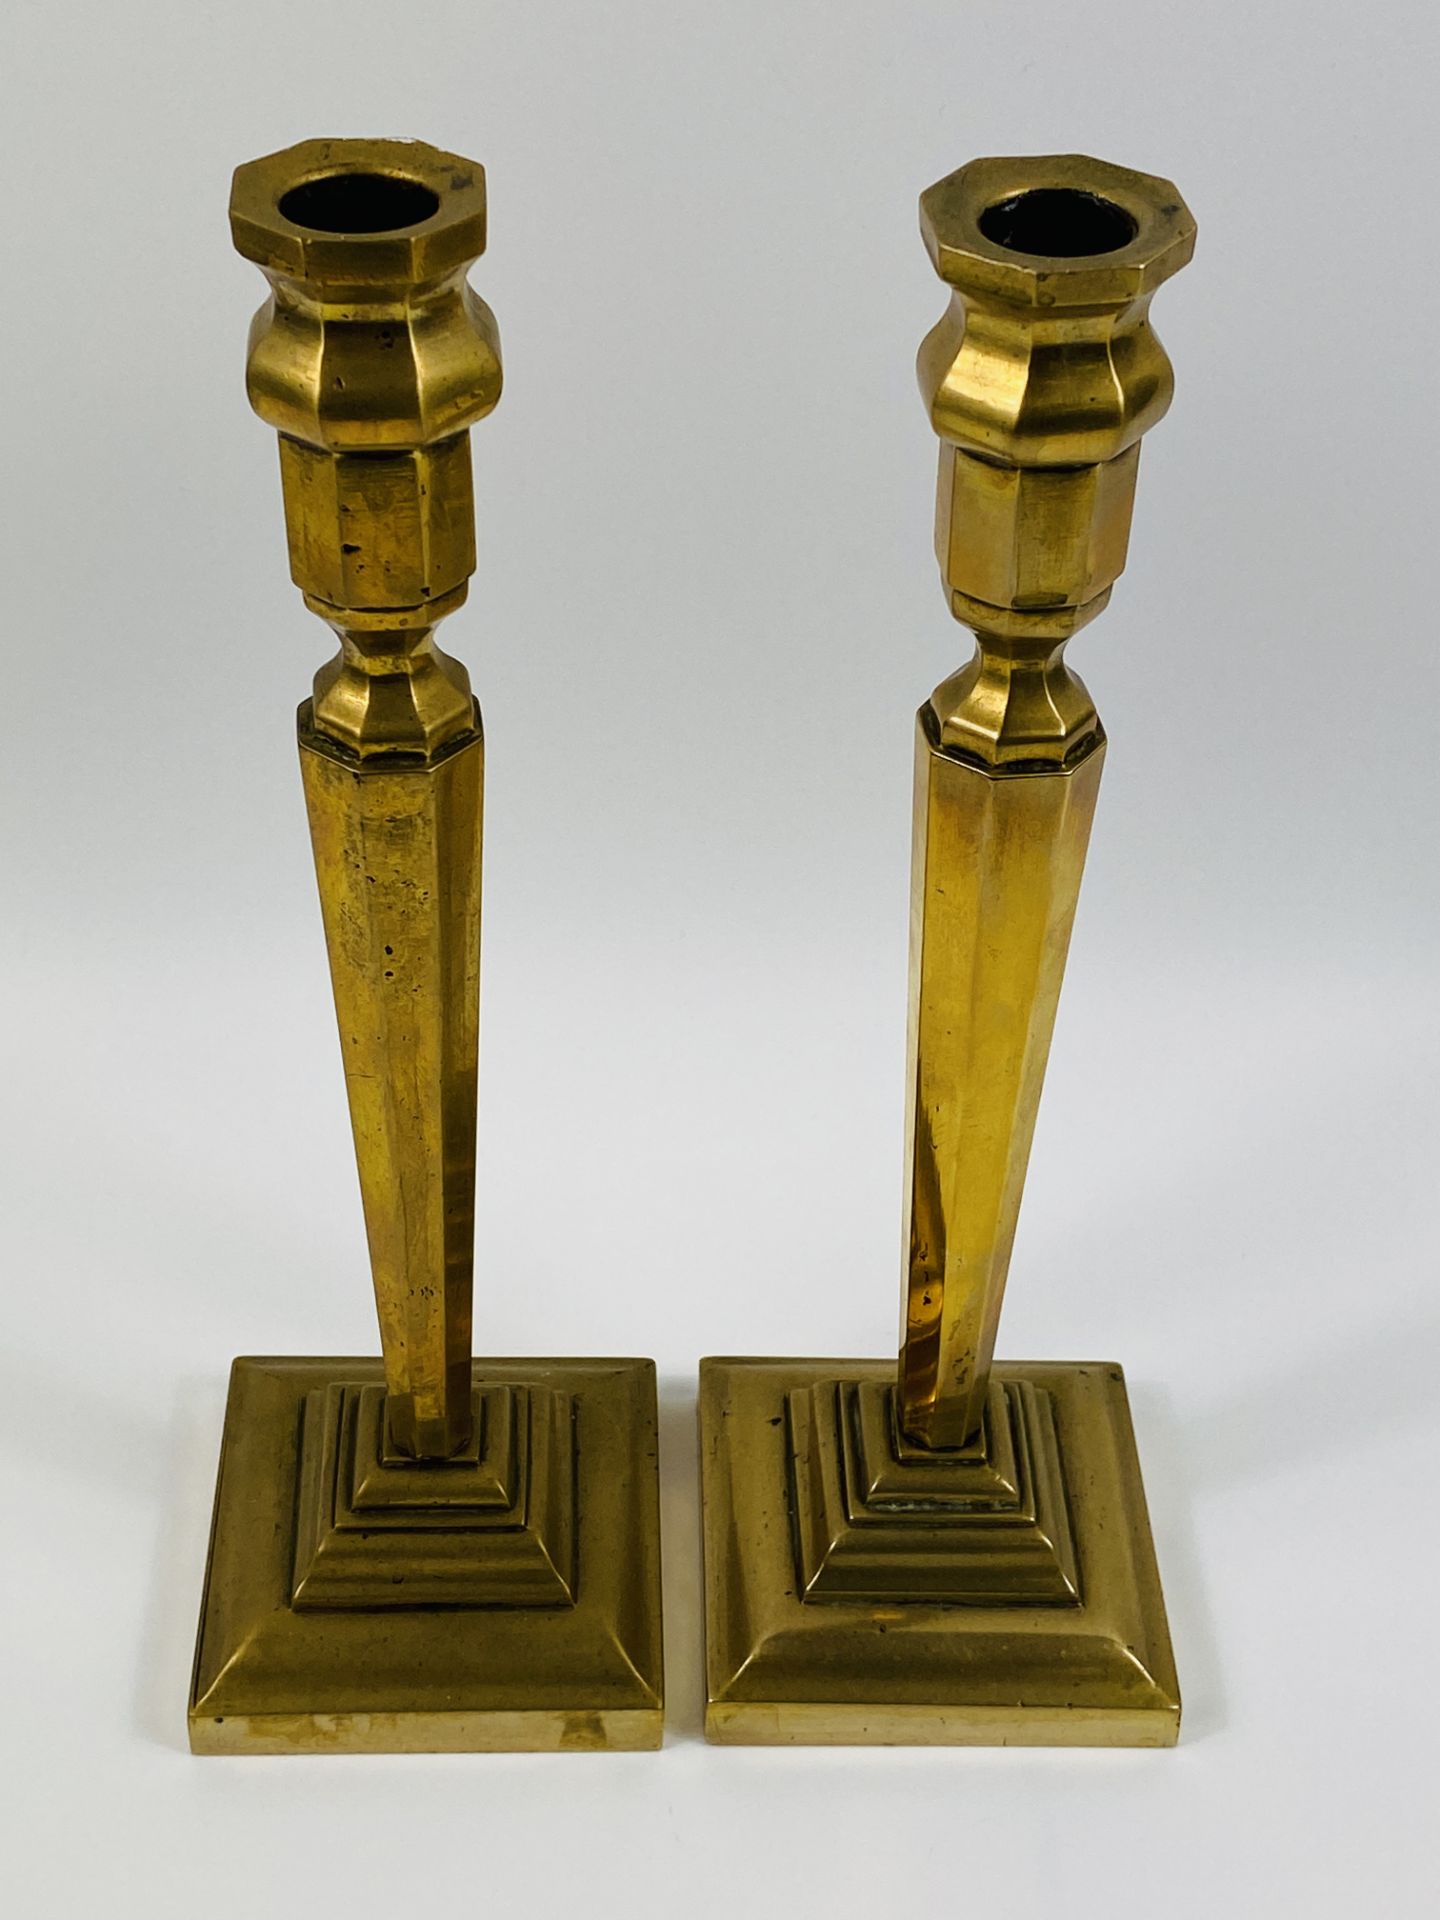 Pair of contemporary brass candlesticks - Image 3 of 3